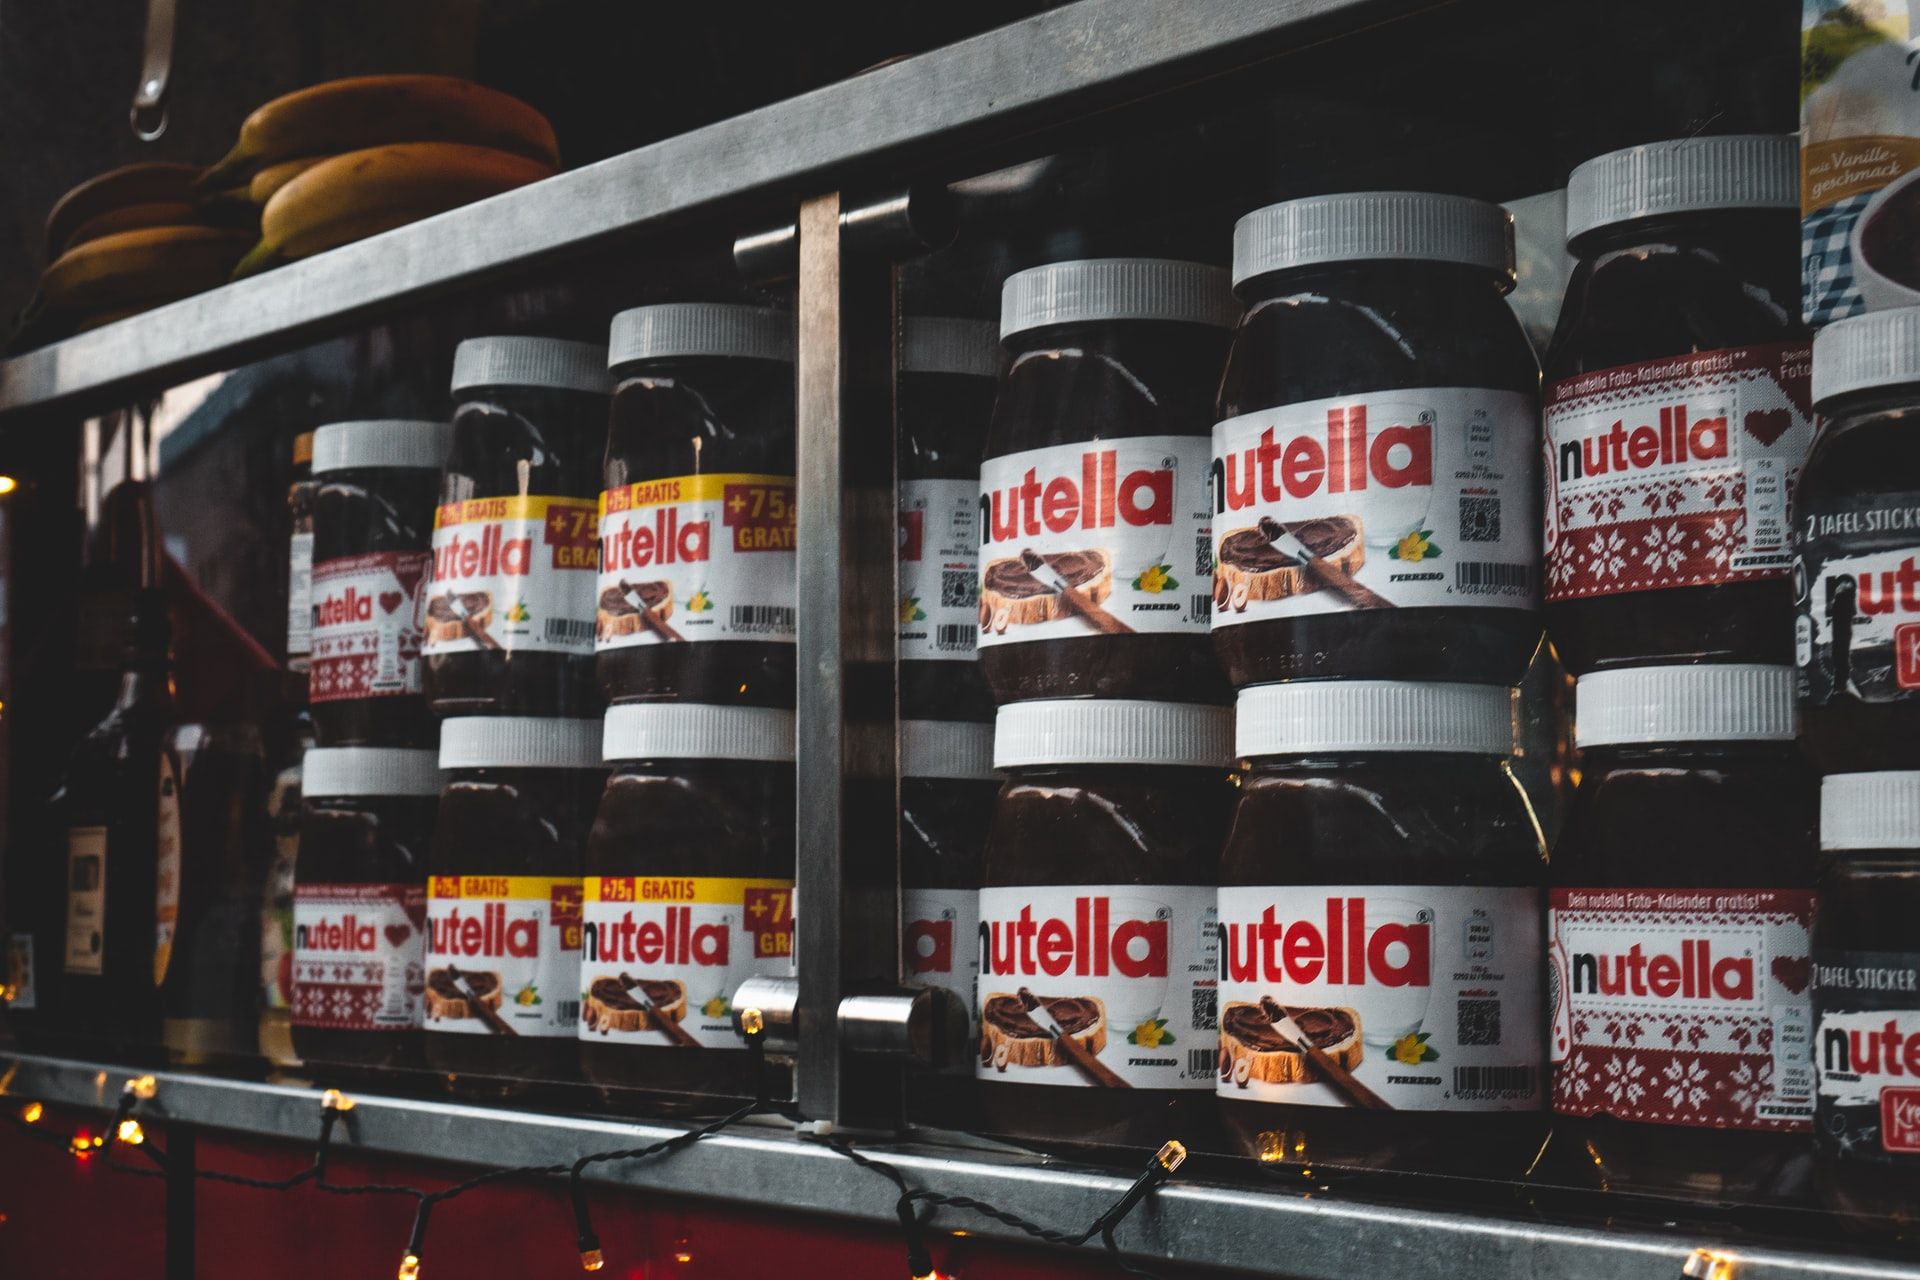 A shelf stacked with jars of Nutella